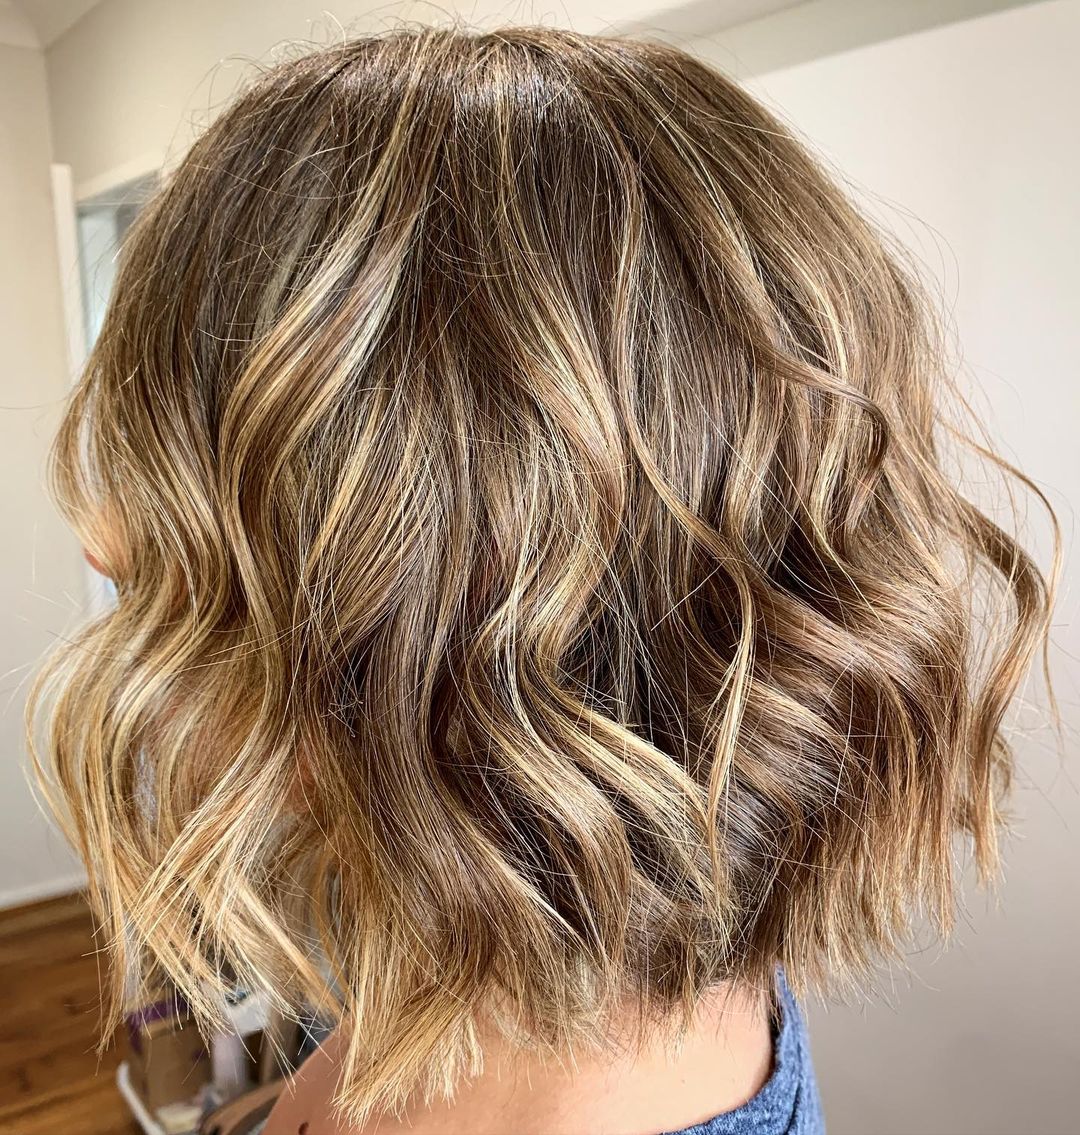 Bob Short Brown Hair with Blonde Highlights